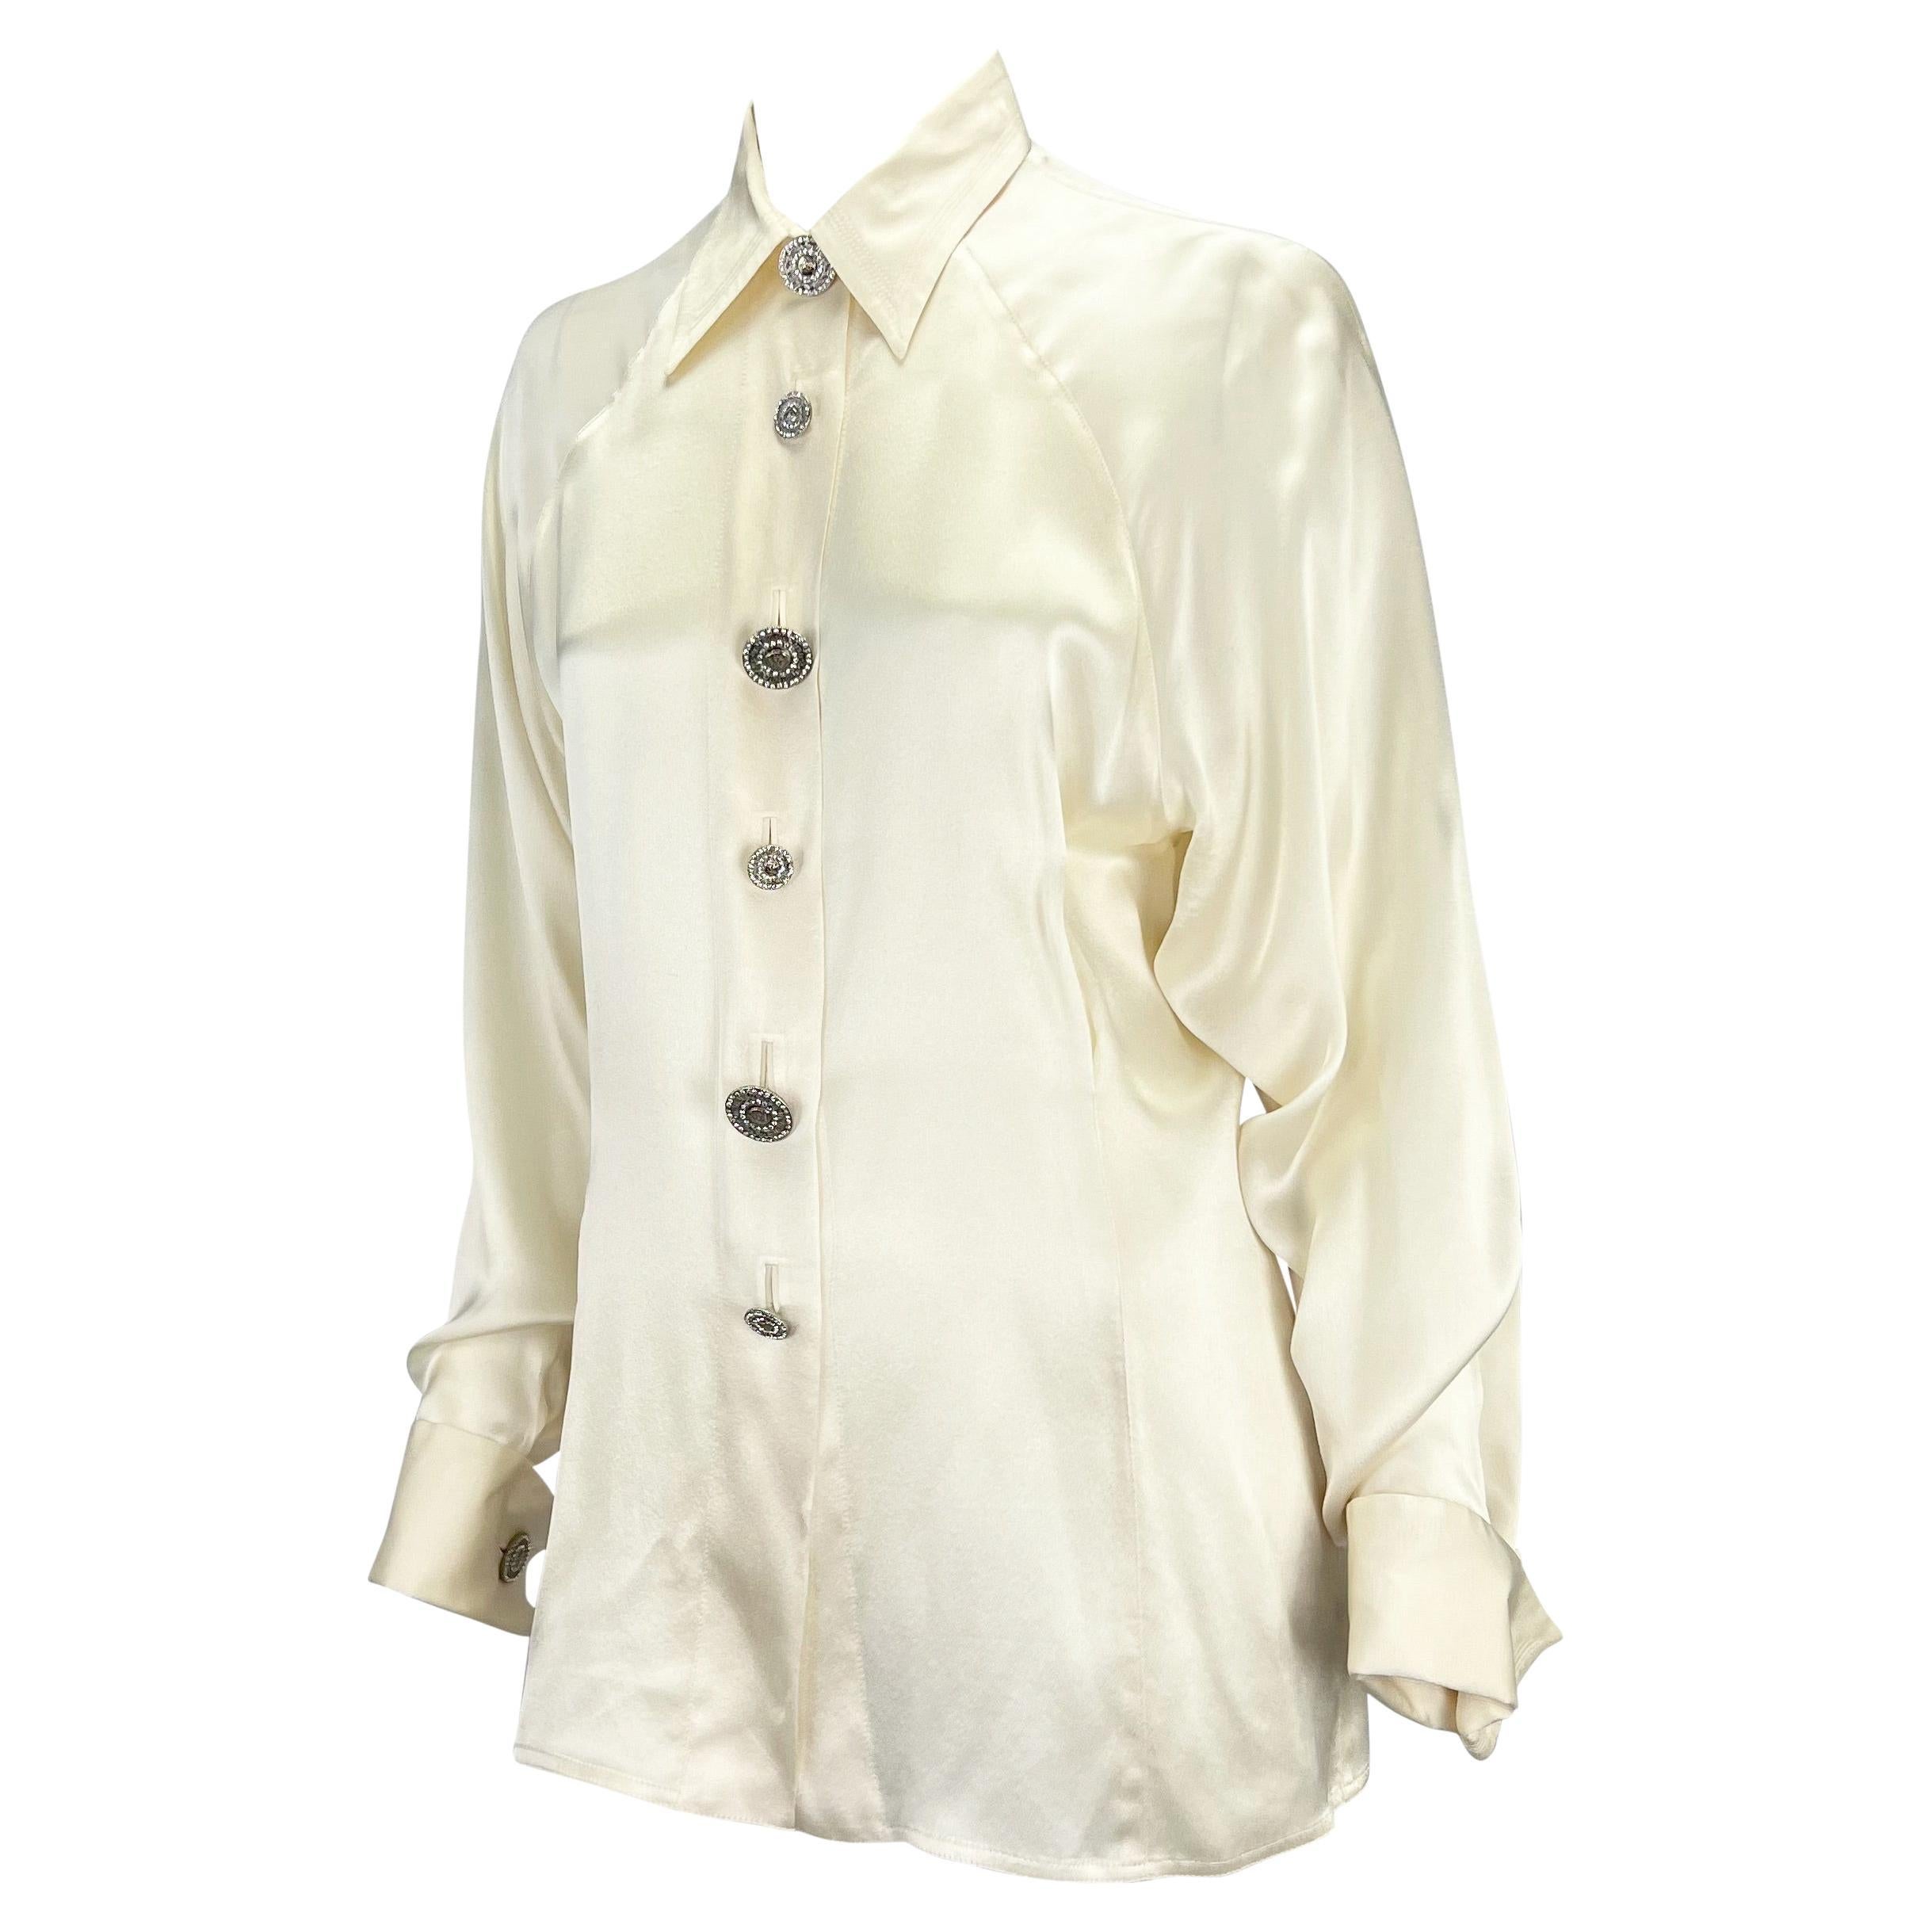 Presenting a creme silk satin Gianni Versace Couture blouse, designed by Gianni Versace. From the 1990s, this shirt is constructed entirely of luxurious silk that glistens with each movement. This top is made complete with rhinestone Versace Medusa